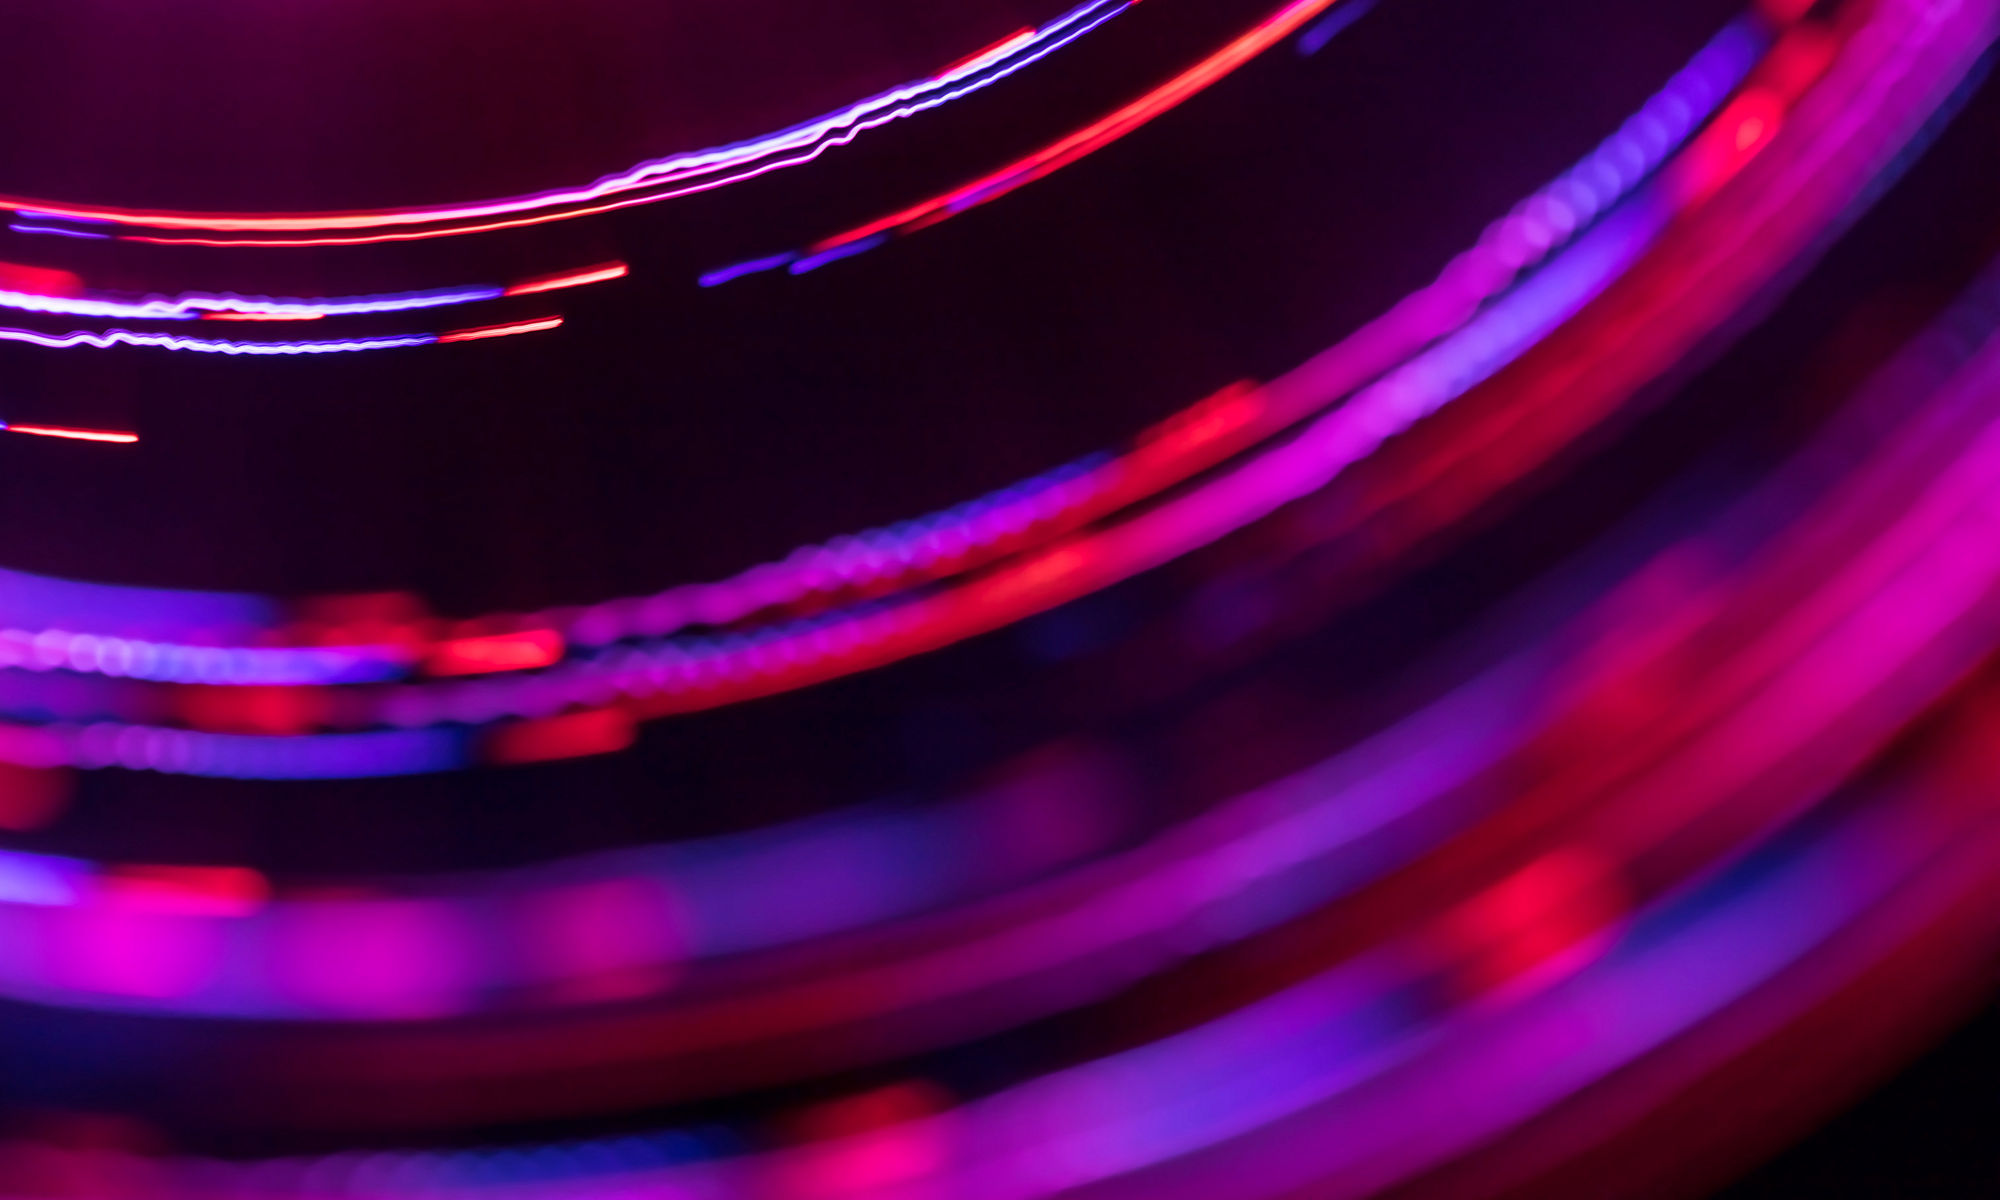 Abstract spinning multi colored lines with blurred motion effect and bokeh. Can be used as some technology (science, information, data, etc.) background.